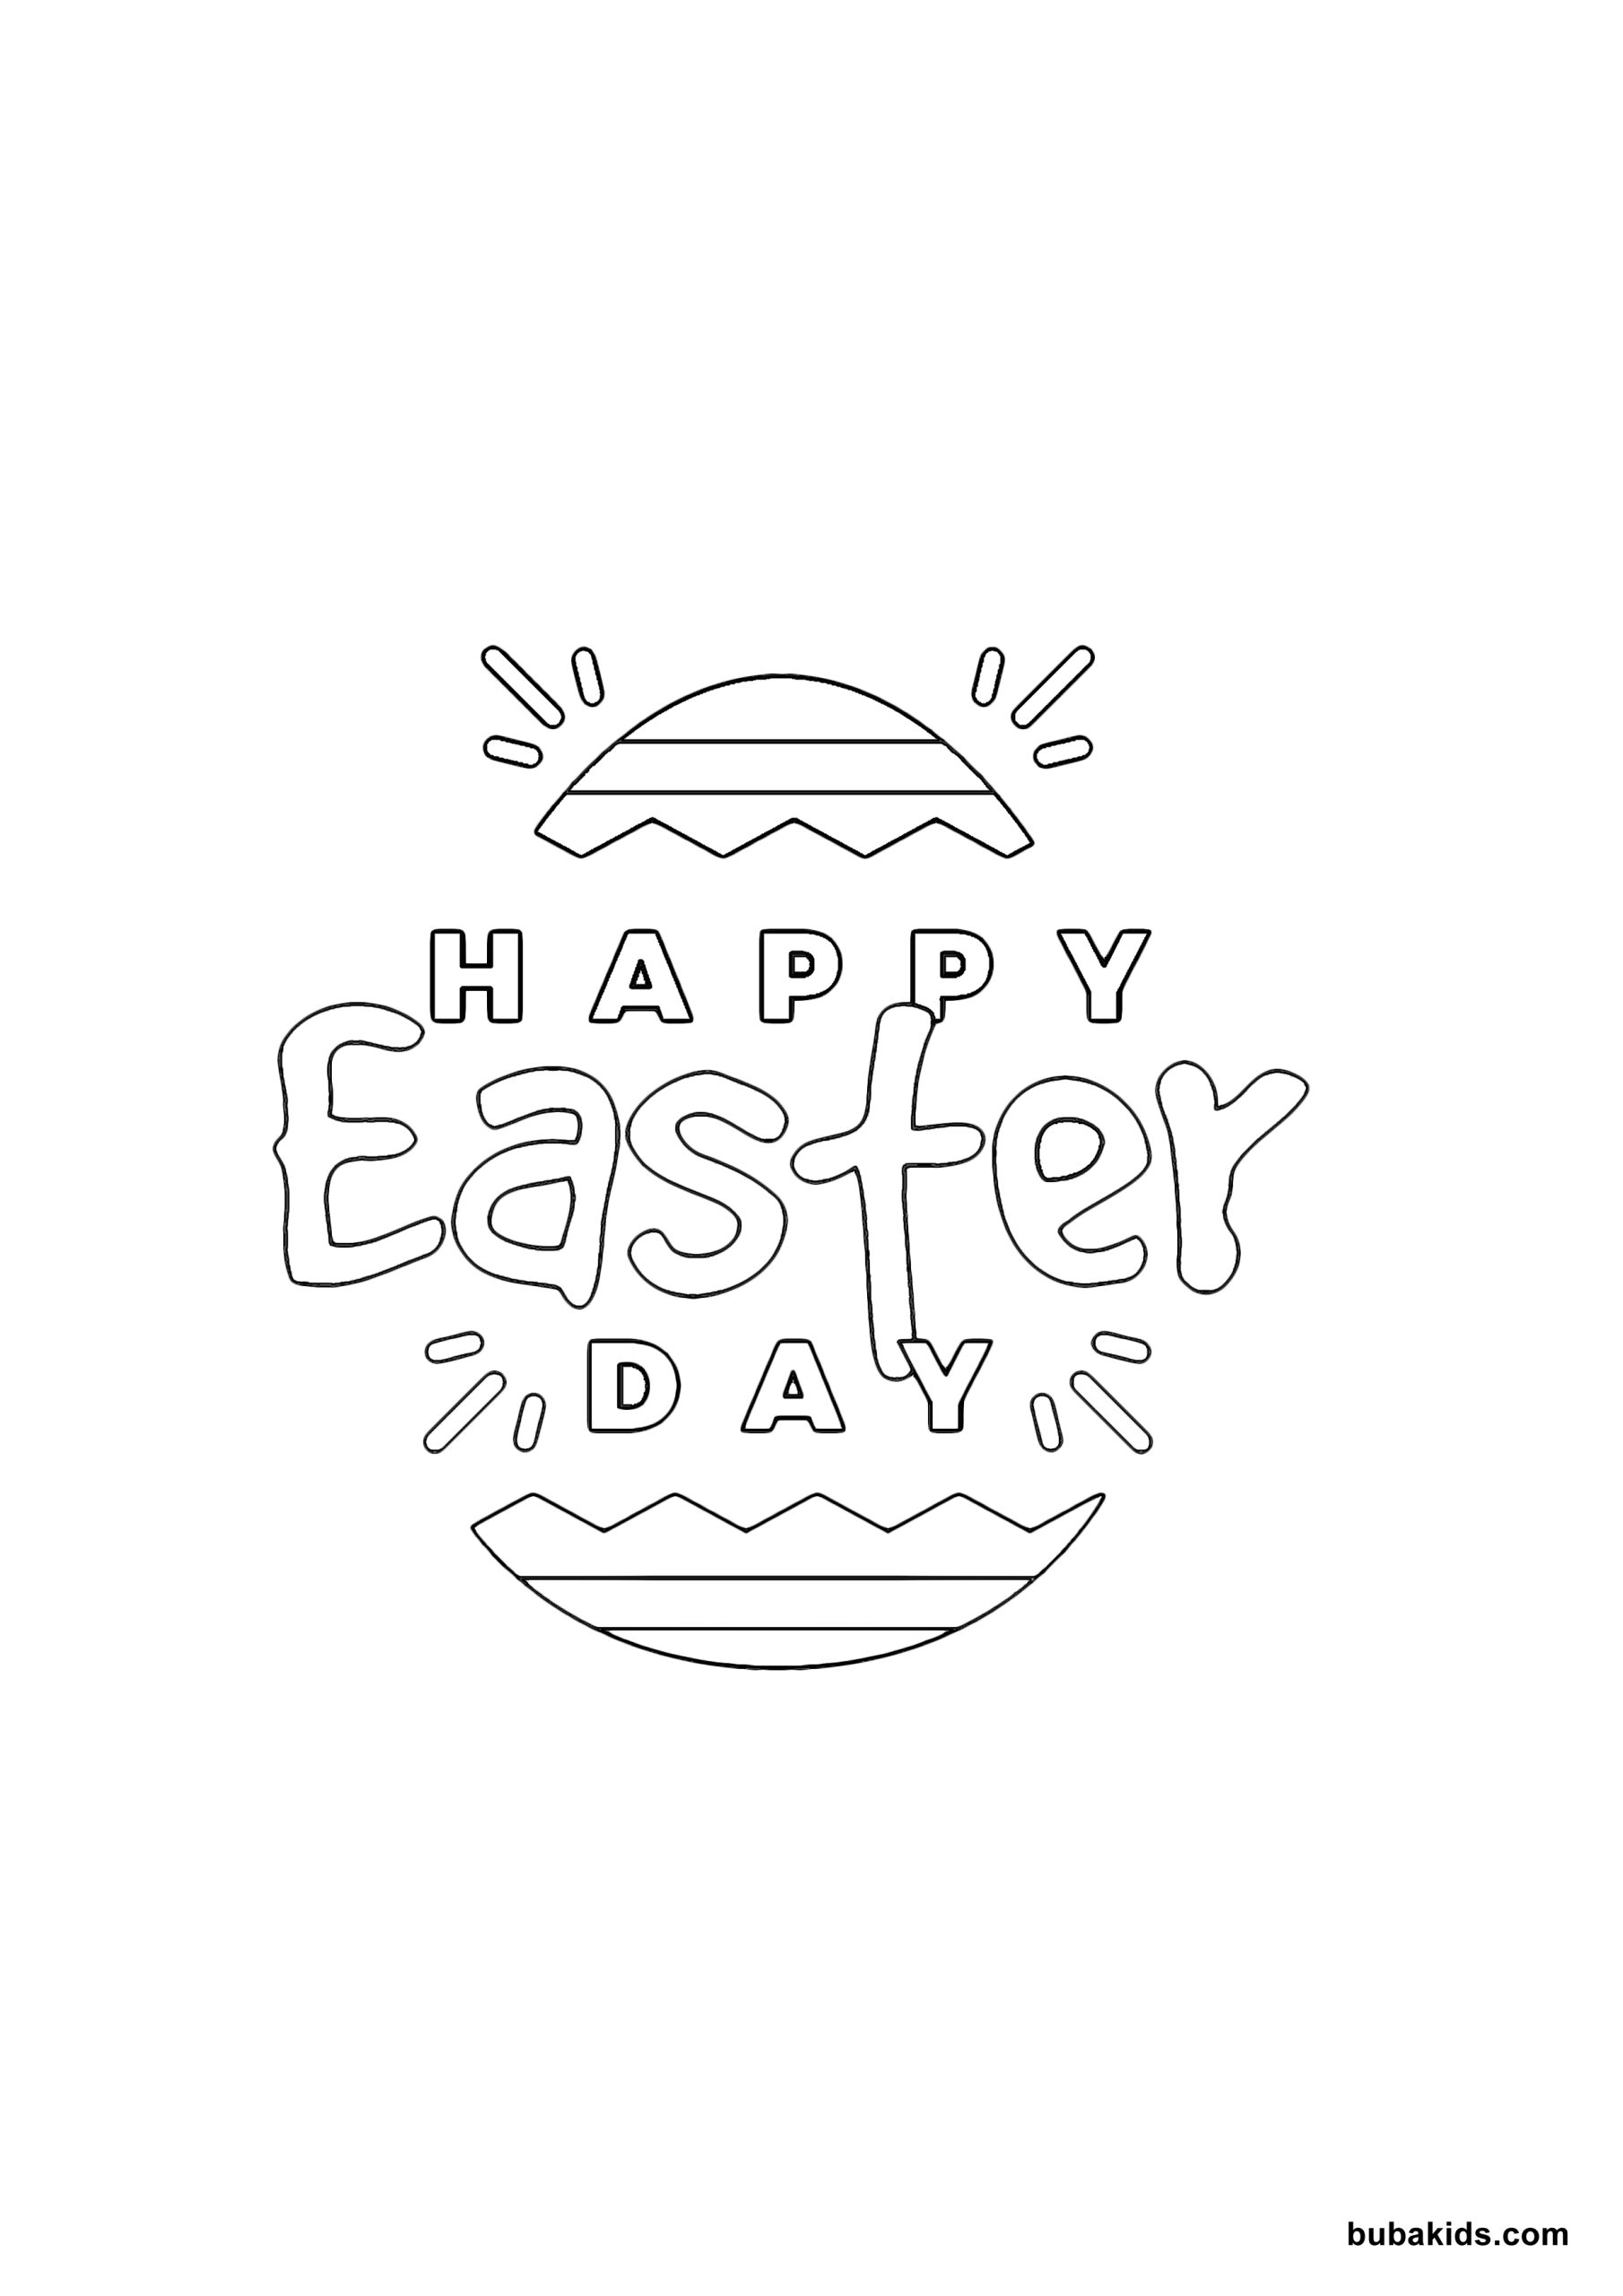 Happy easter day coloring page Wallpaper